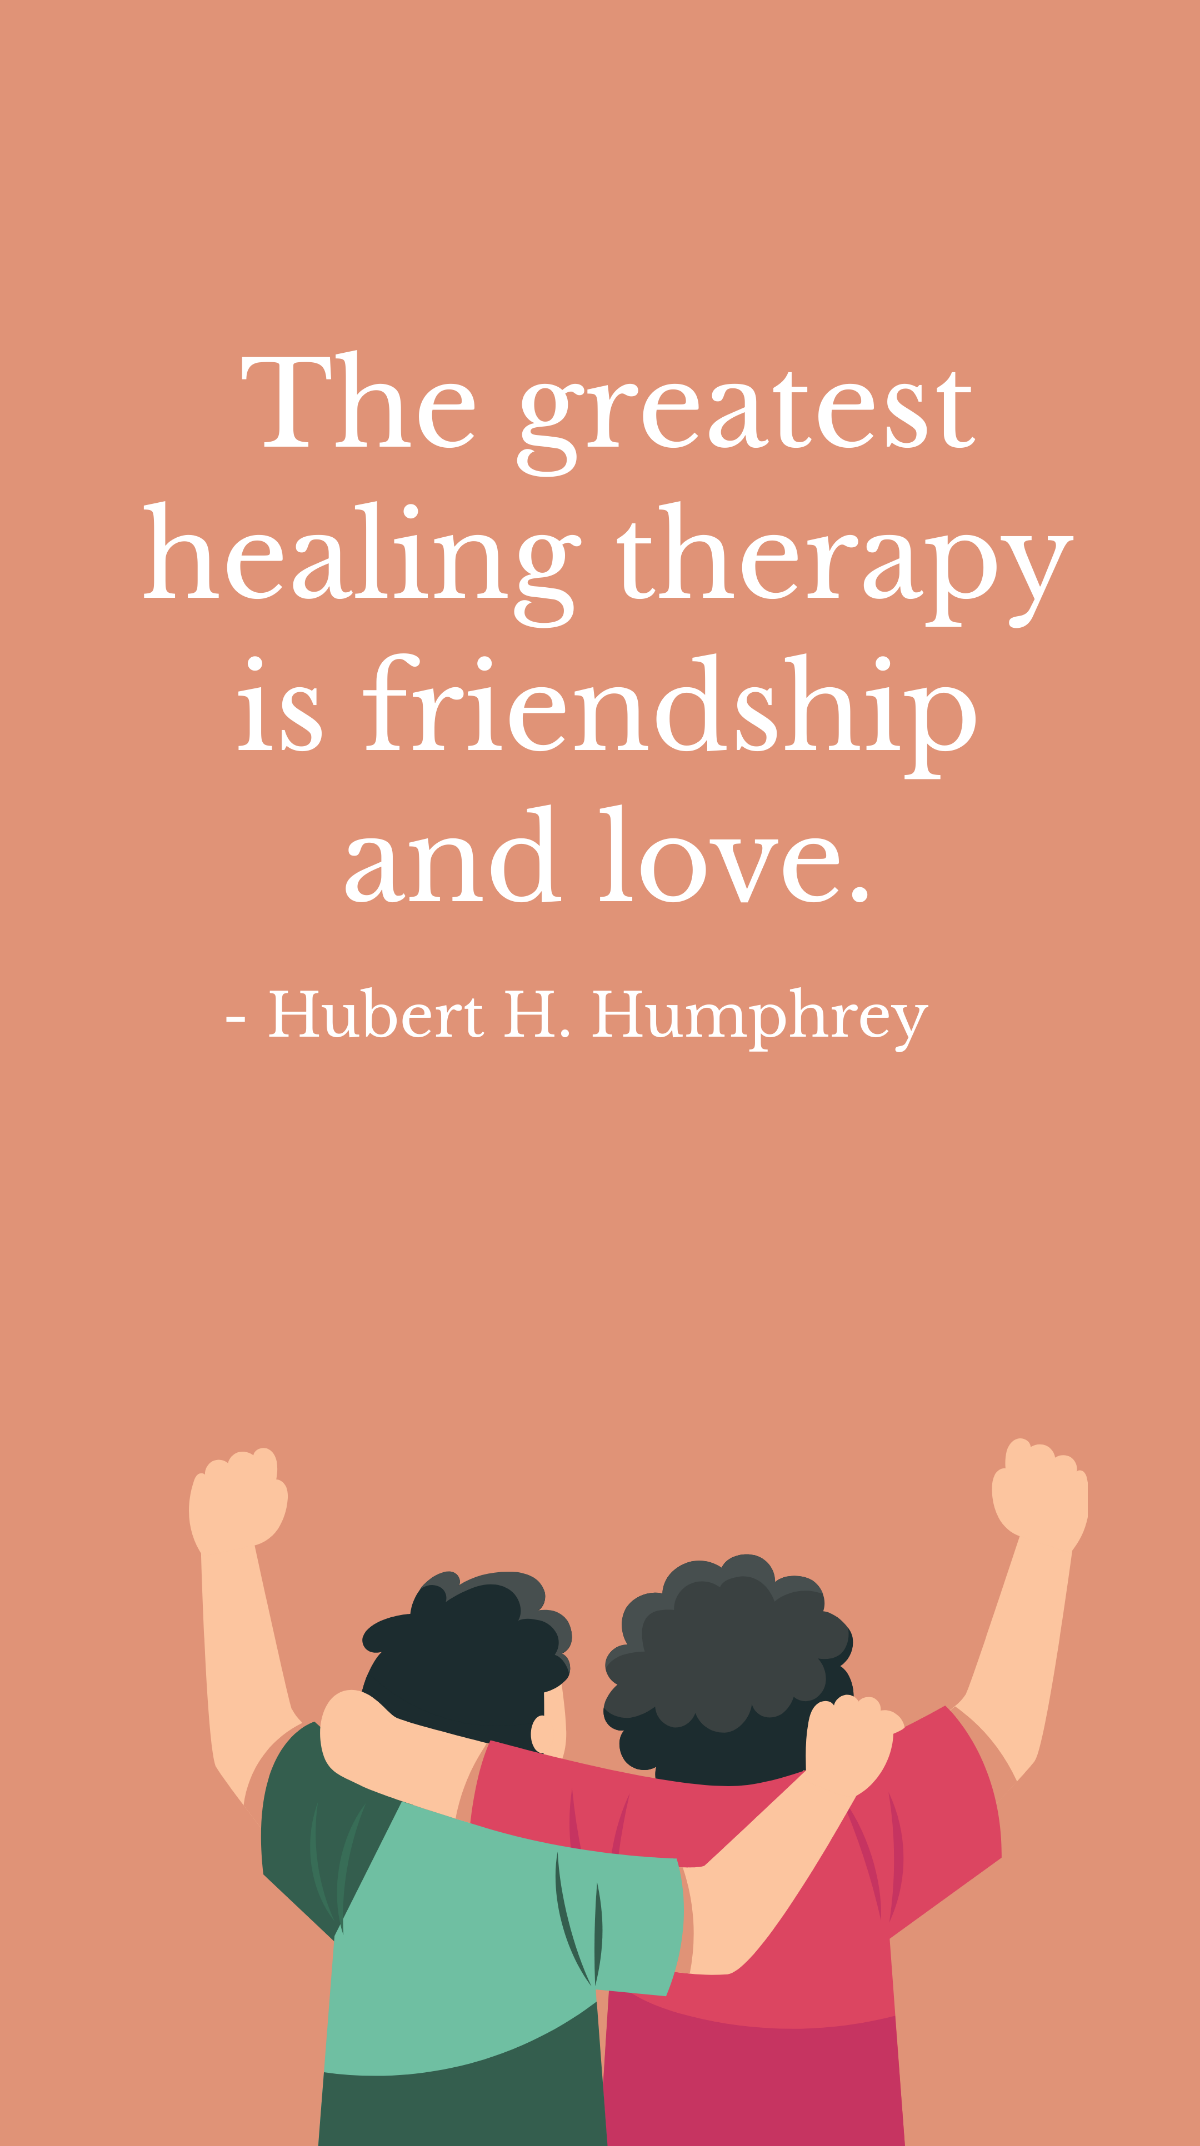 Hubert H. Humphrey - The greatest healing therapy is friendship and love. Template